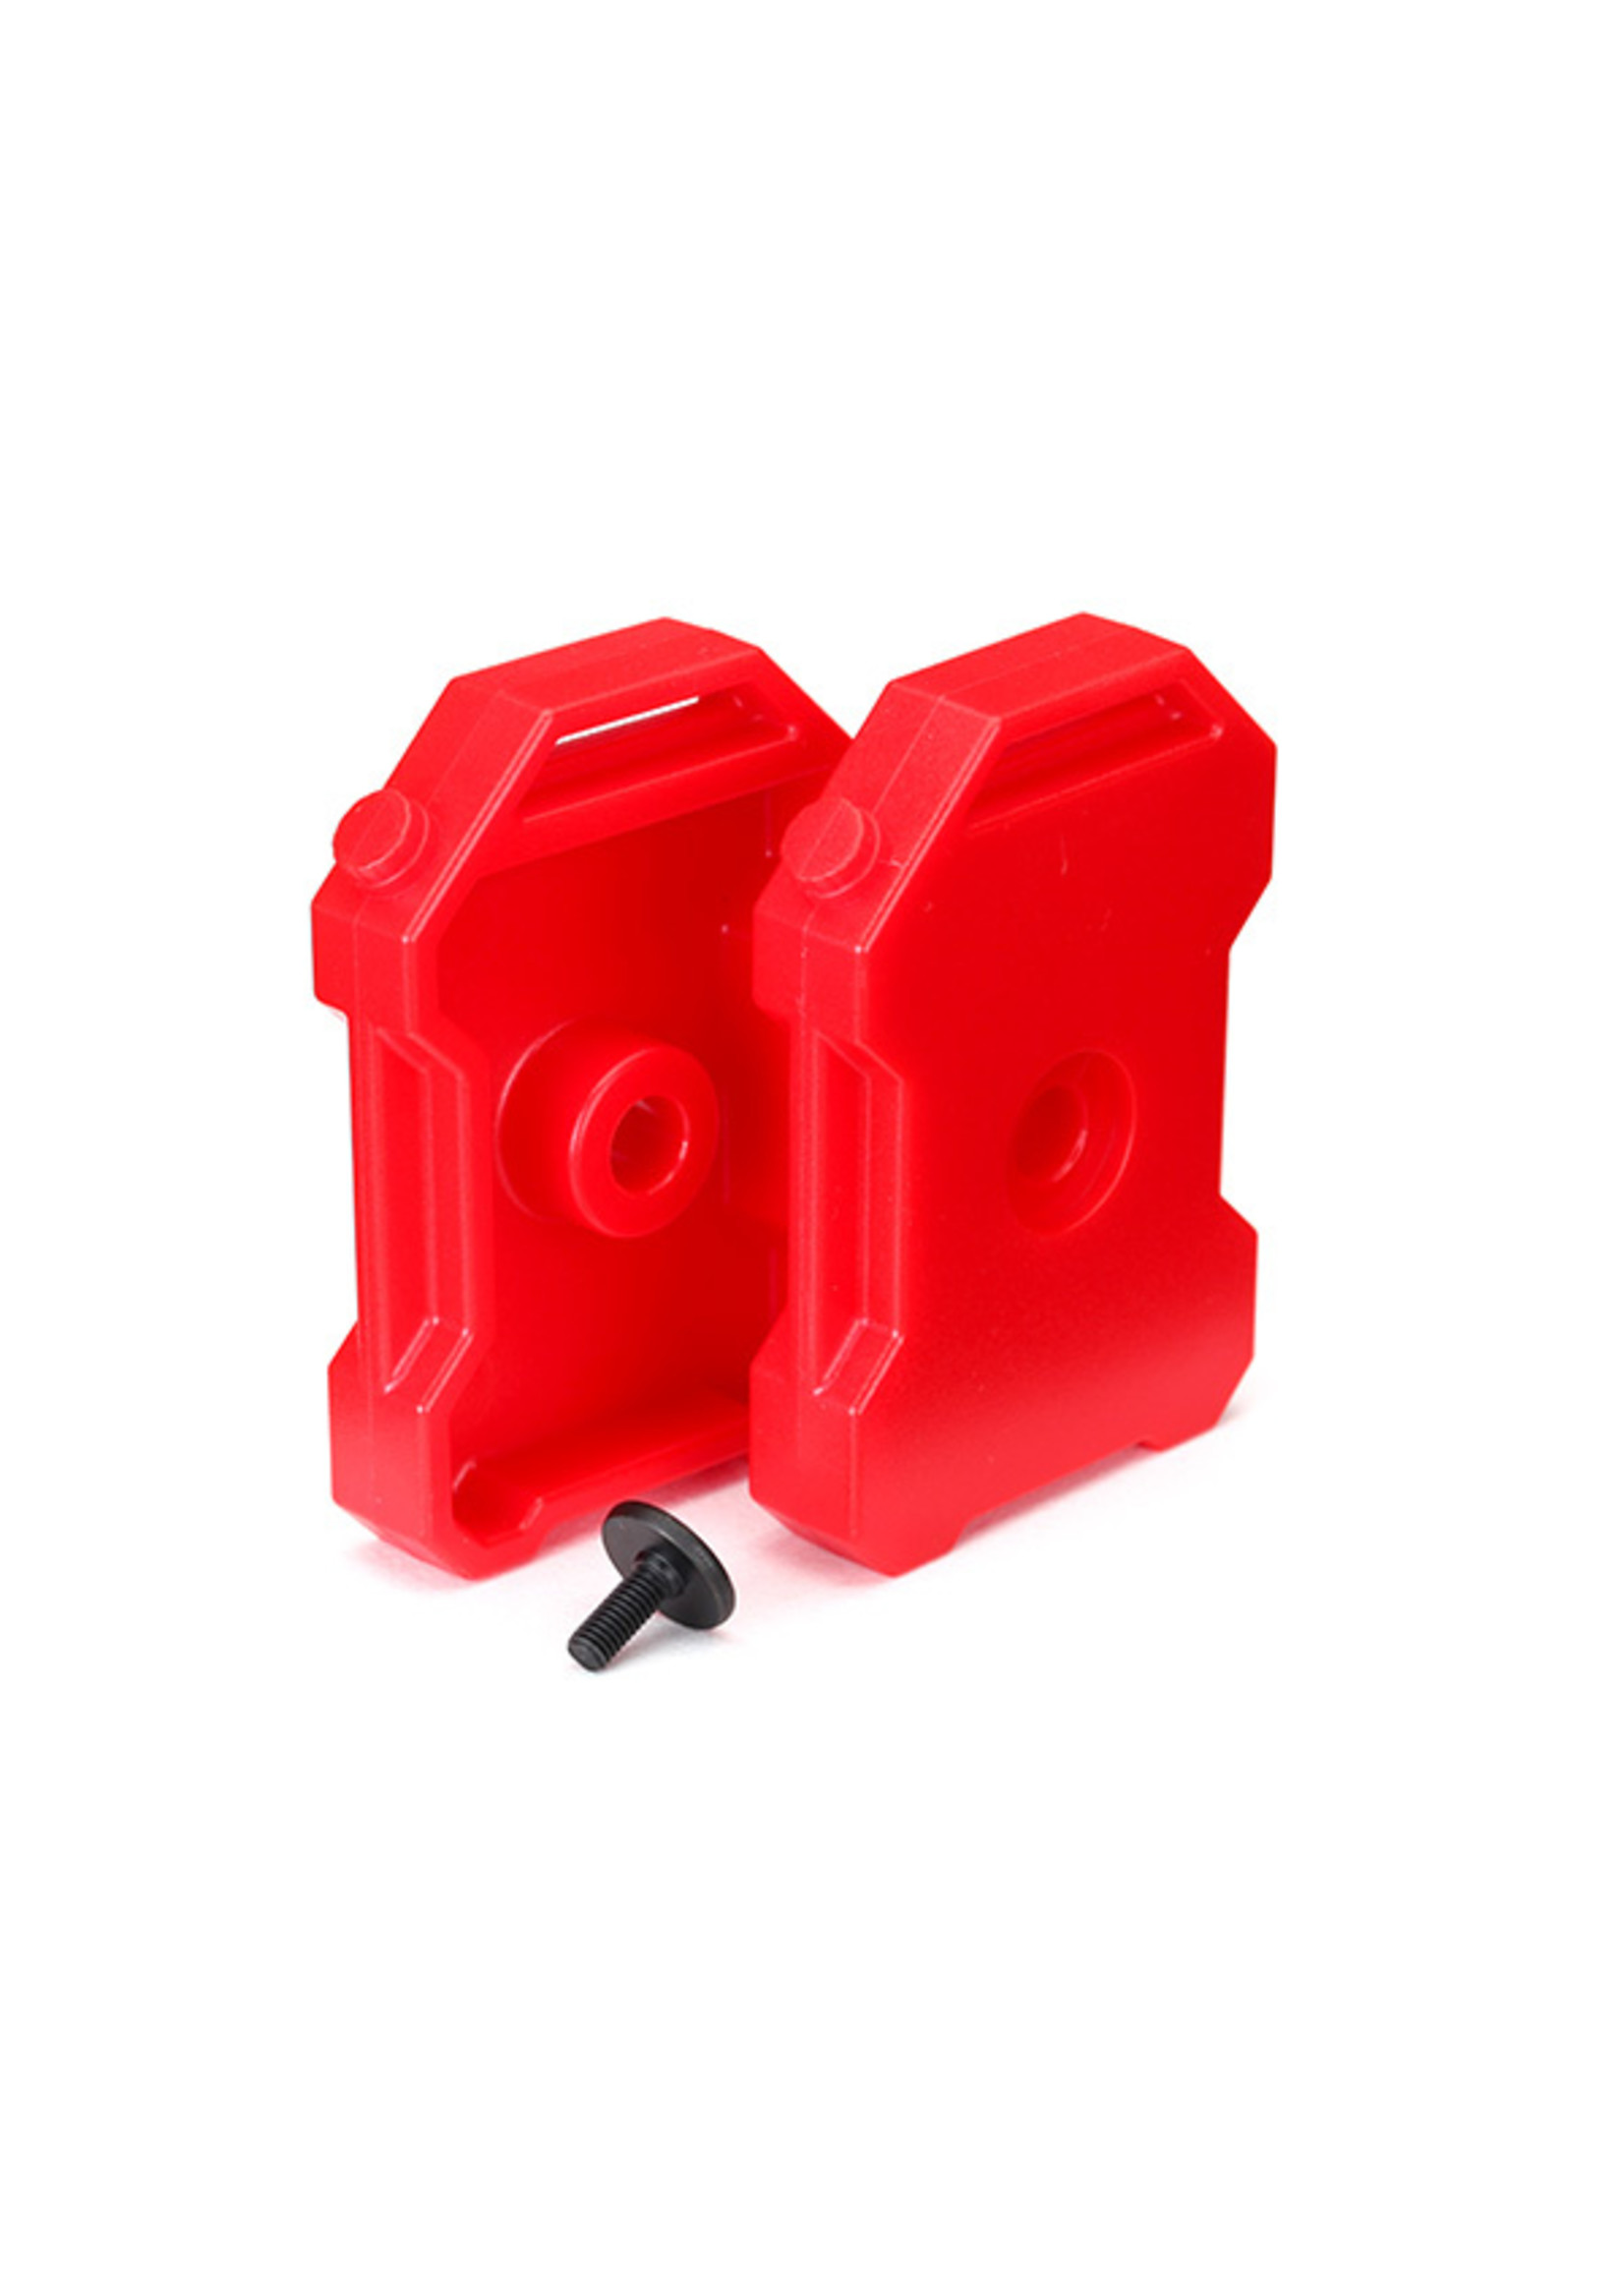 Traxxas 8022 - Fuel Canisters - Red